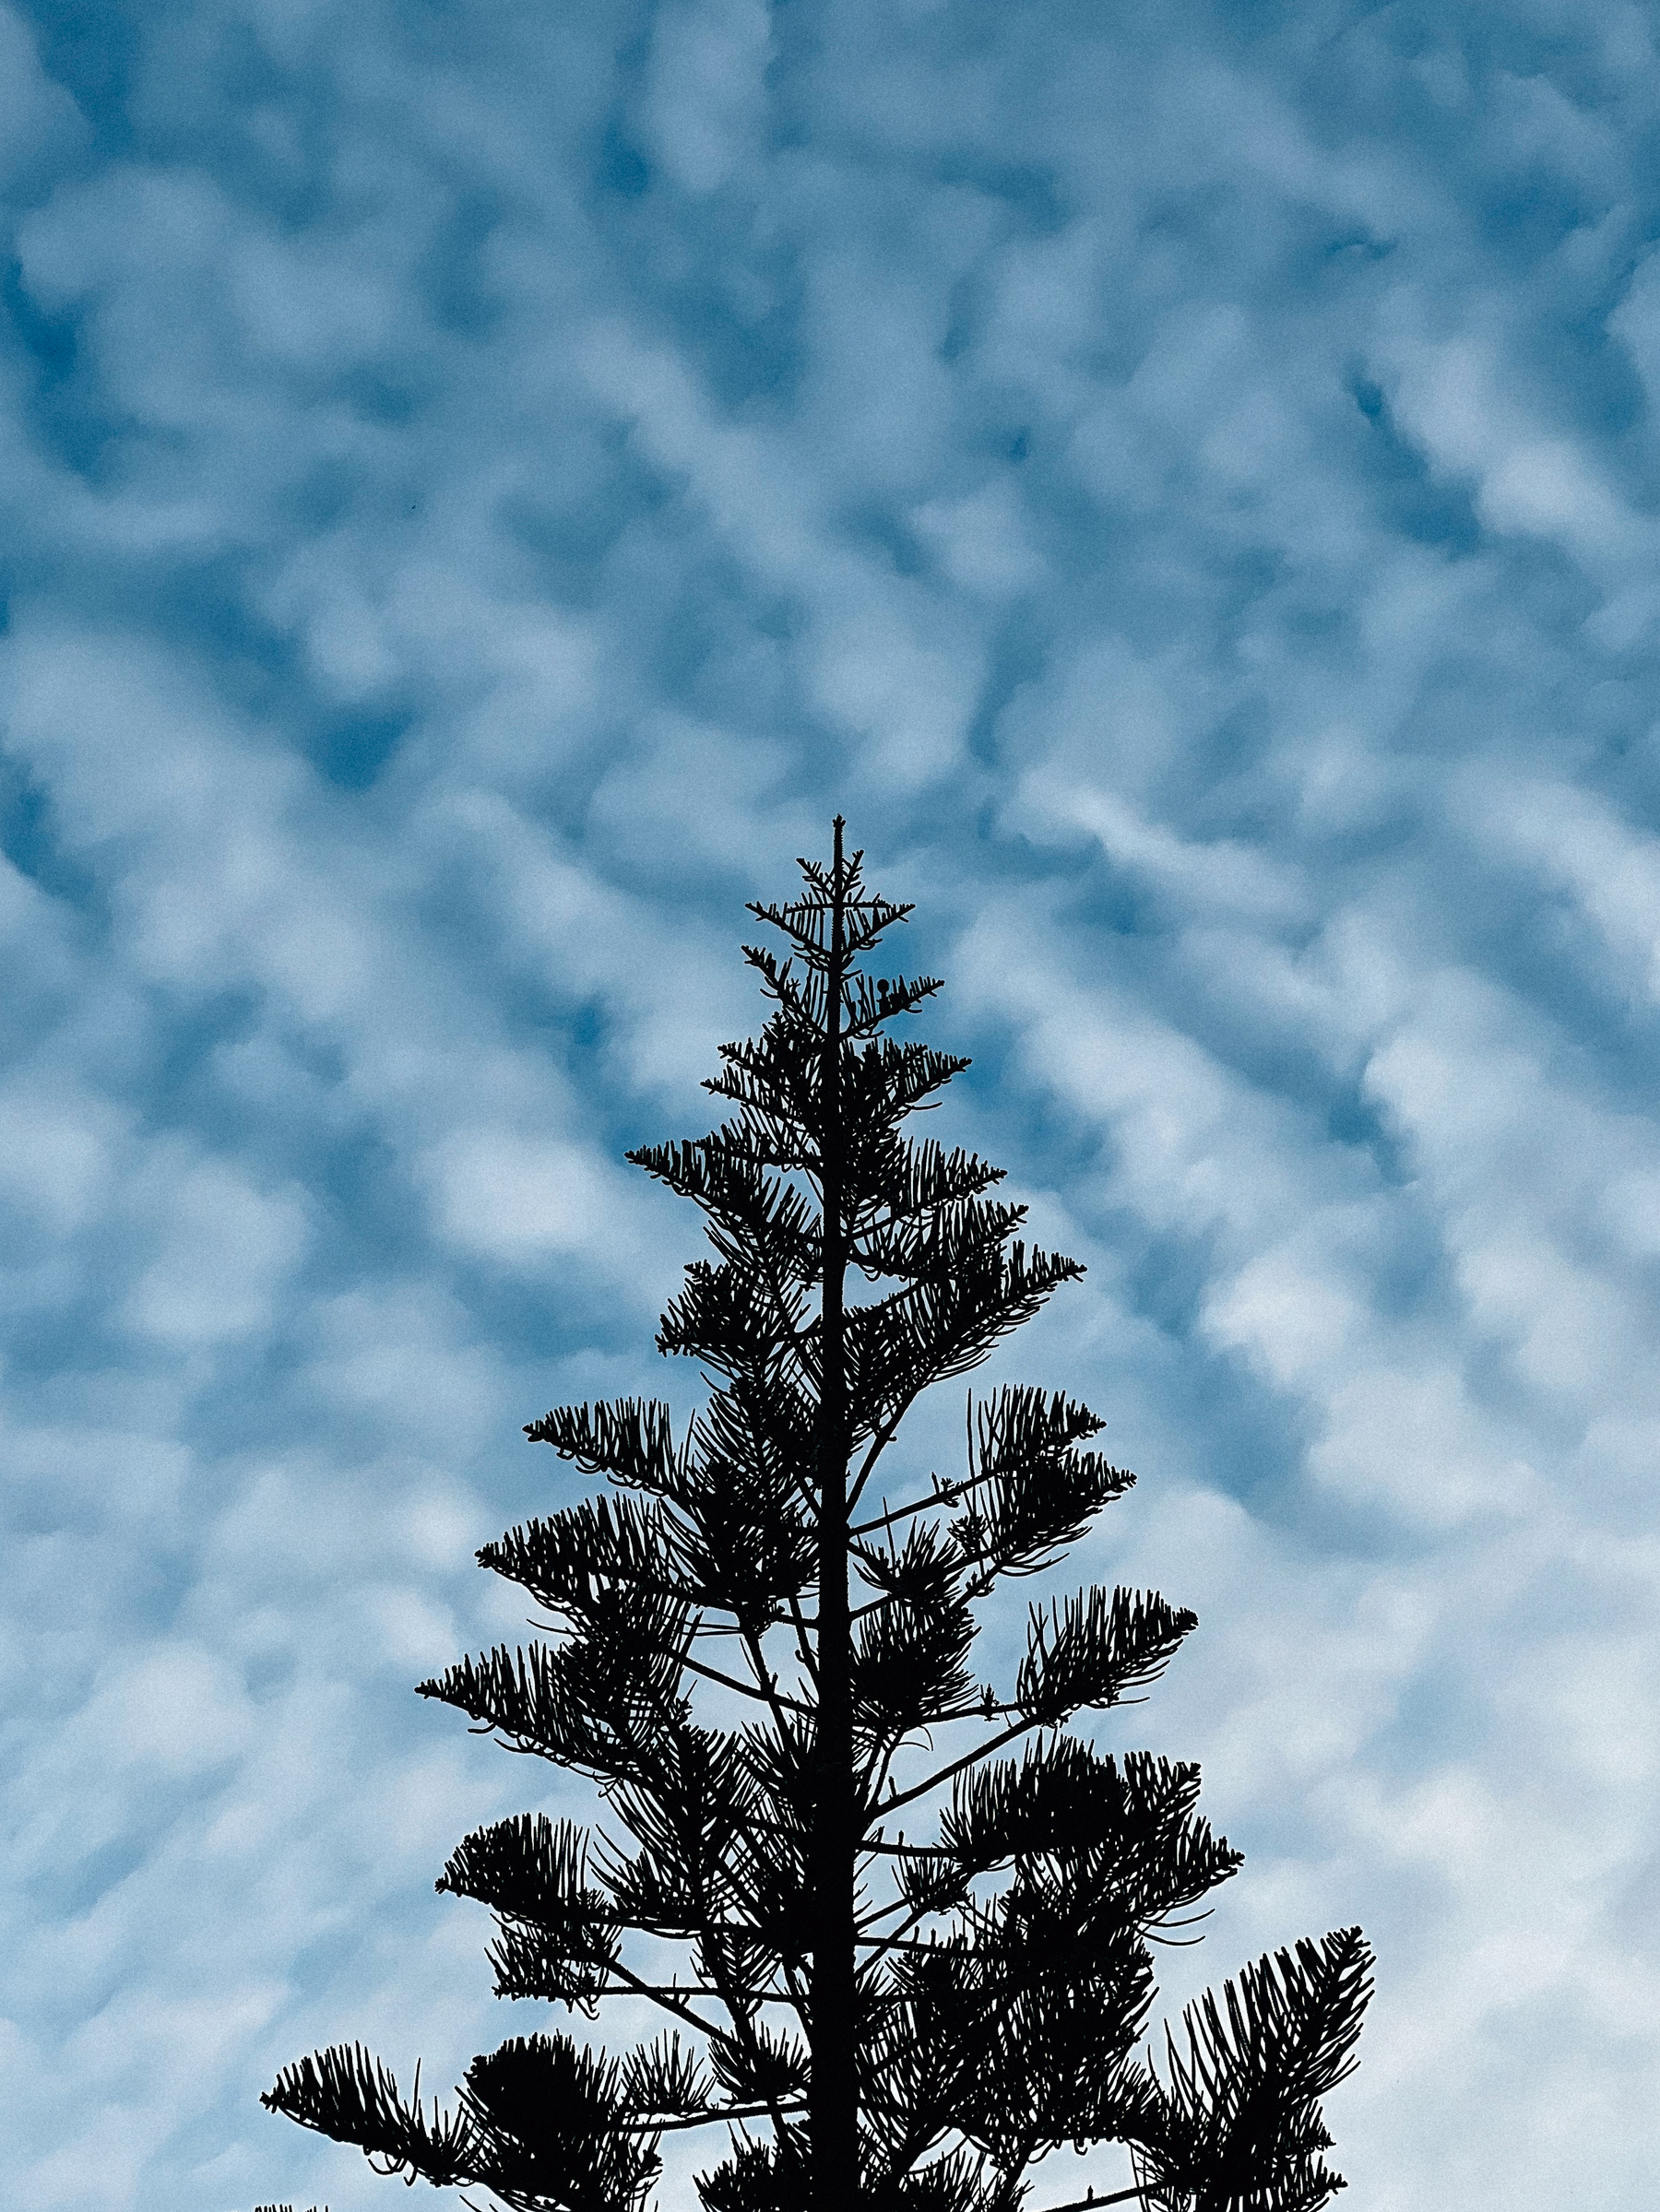 A Norfolk Island Pine tree silhouetted against a blue sky with a pattern of wispy, white clouds.